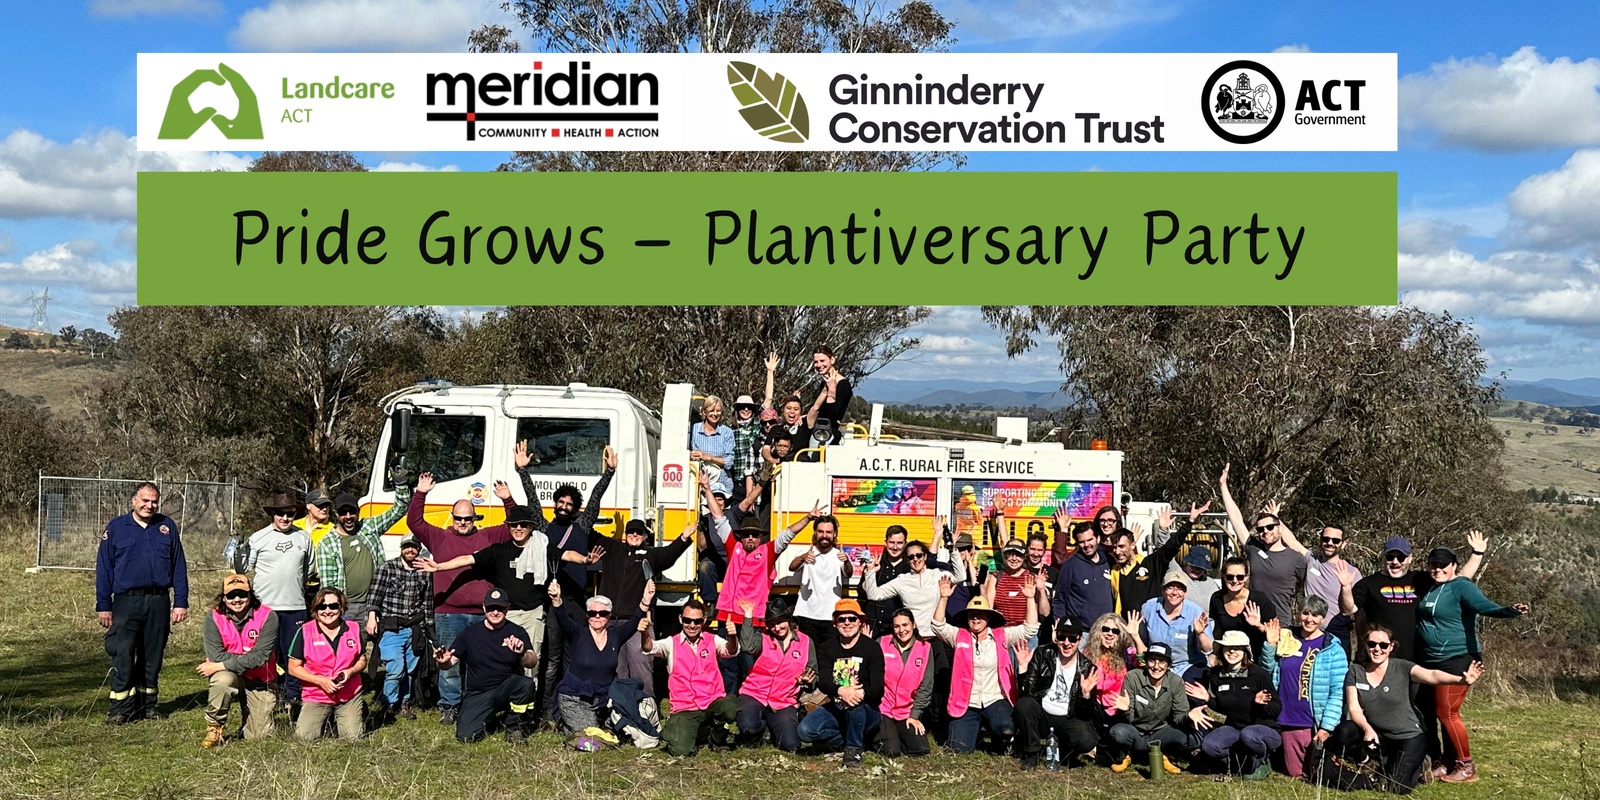 Banner image for Pride Grows "Plantiversary" Party